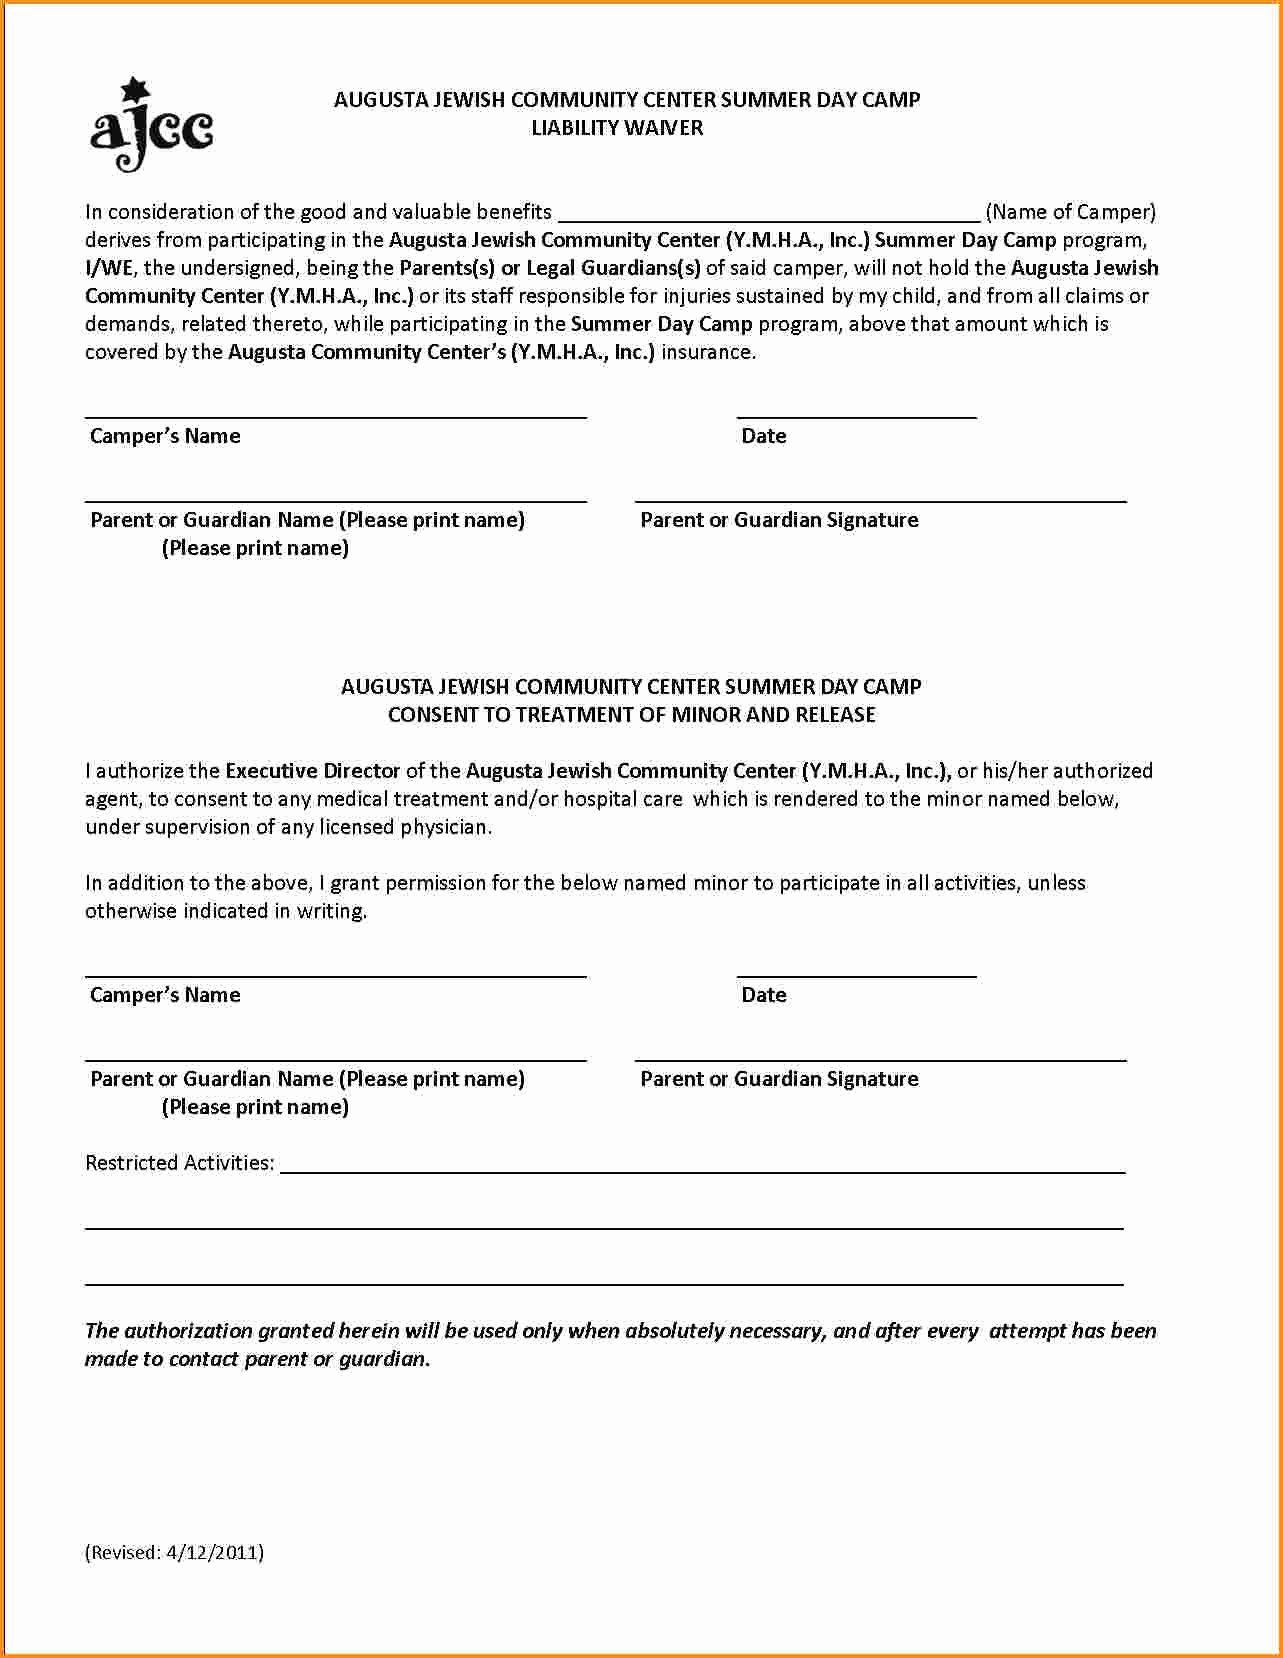 General Liability Waiver form Template Lovely 28 Of Product Liability